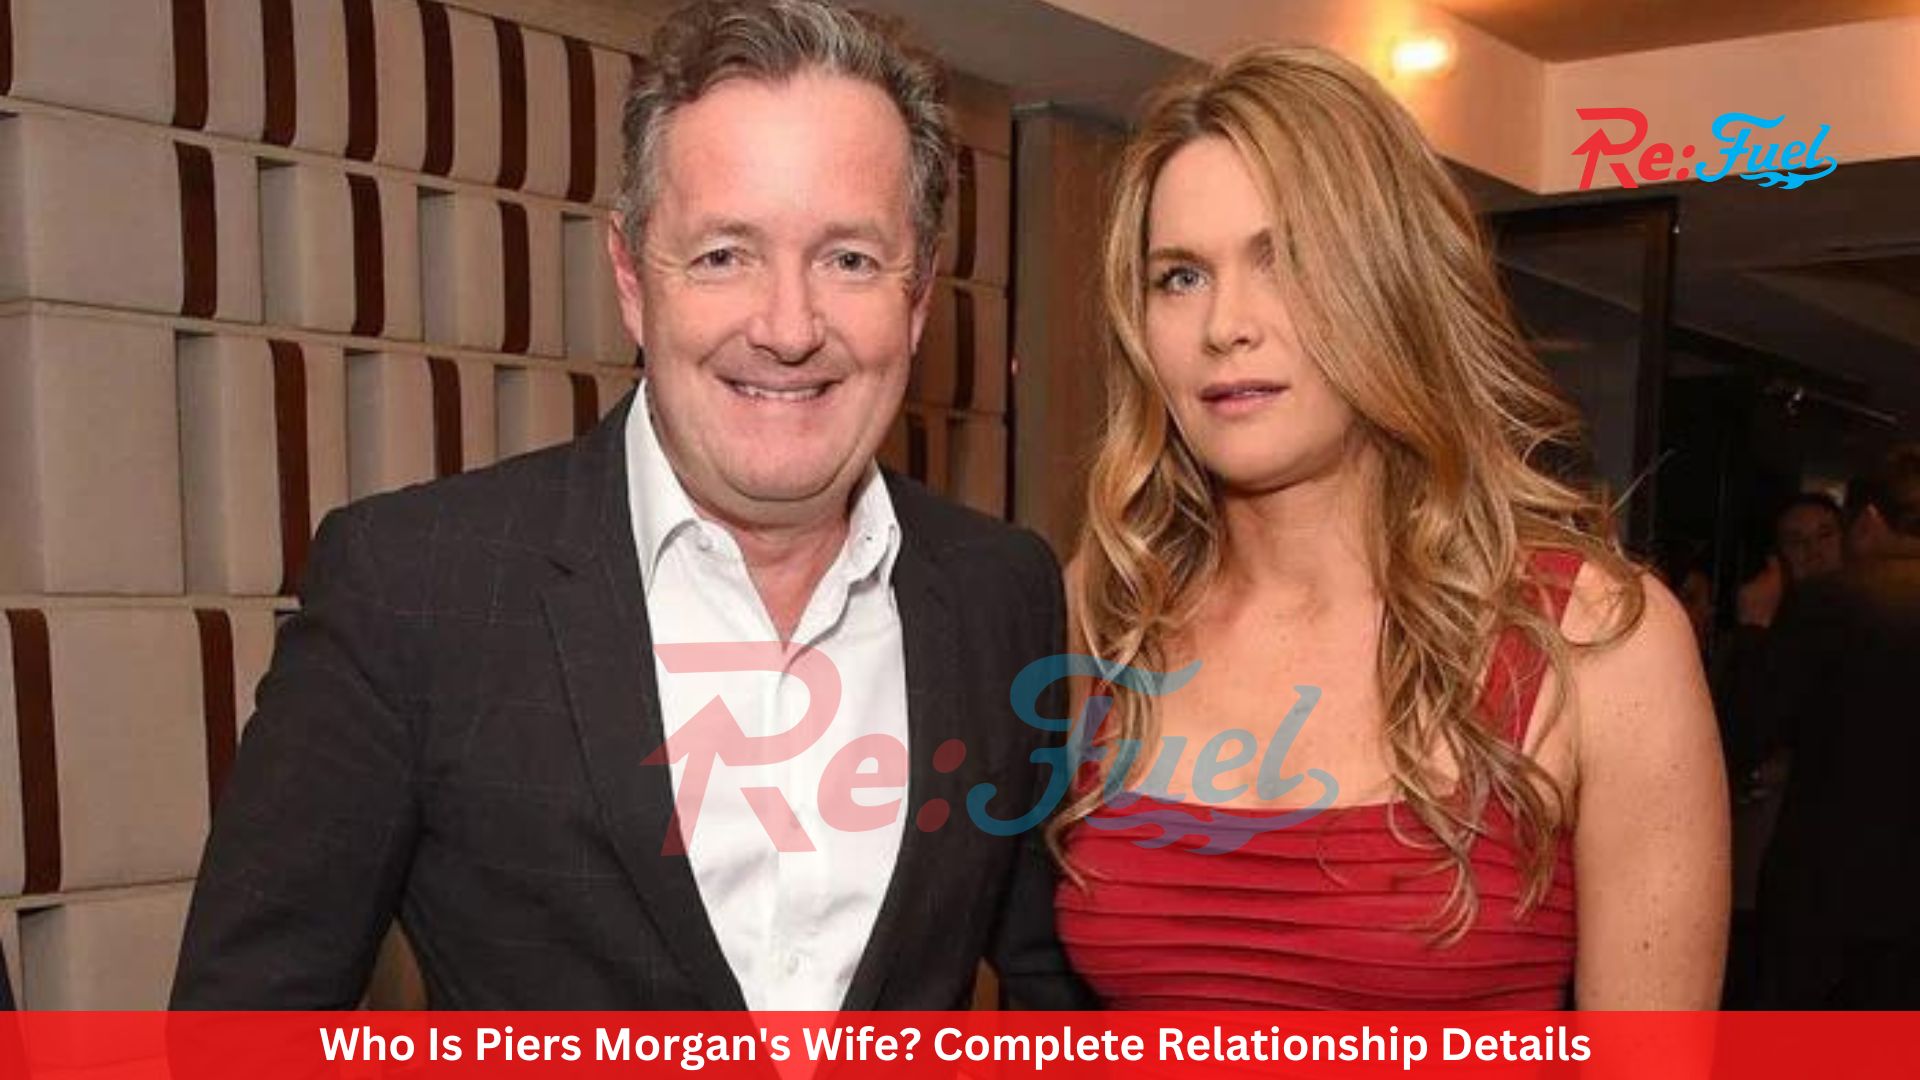 Who Is Piers Morgan's Wife? Complete Relationship Details